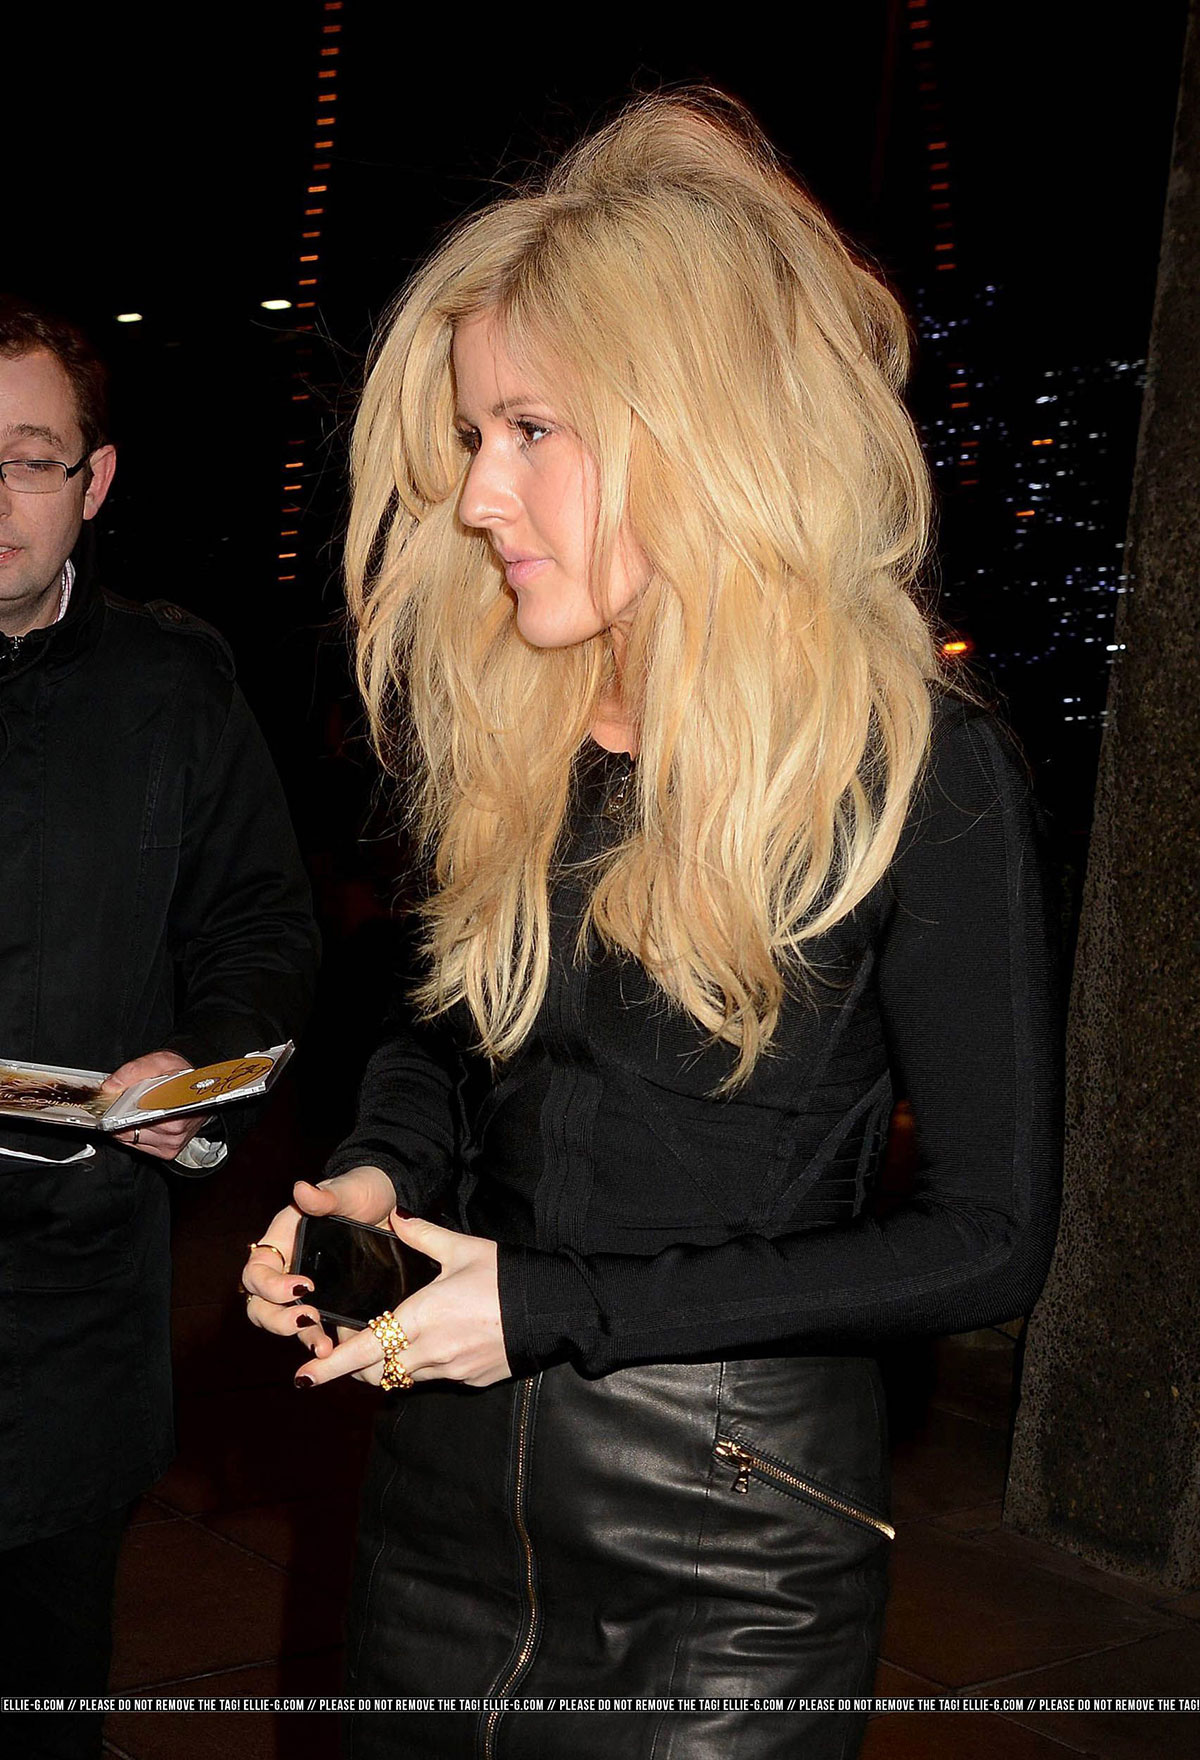 Ellie Goulding arriving at RTE studios for The Late Late Show